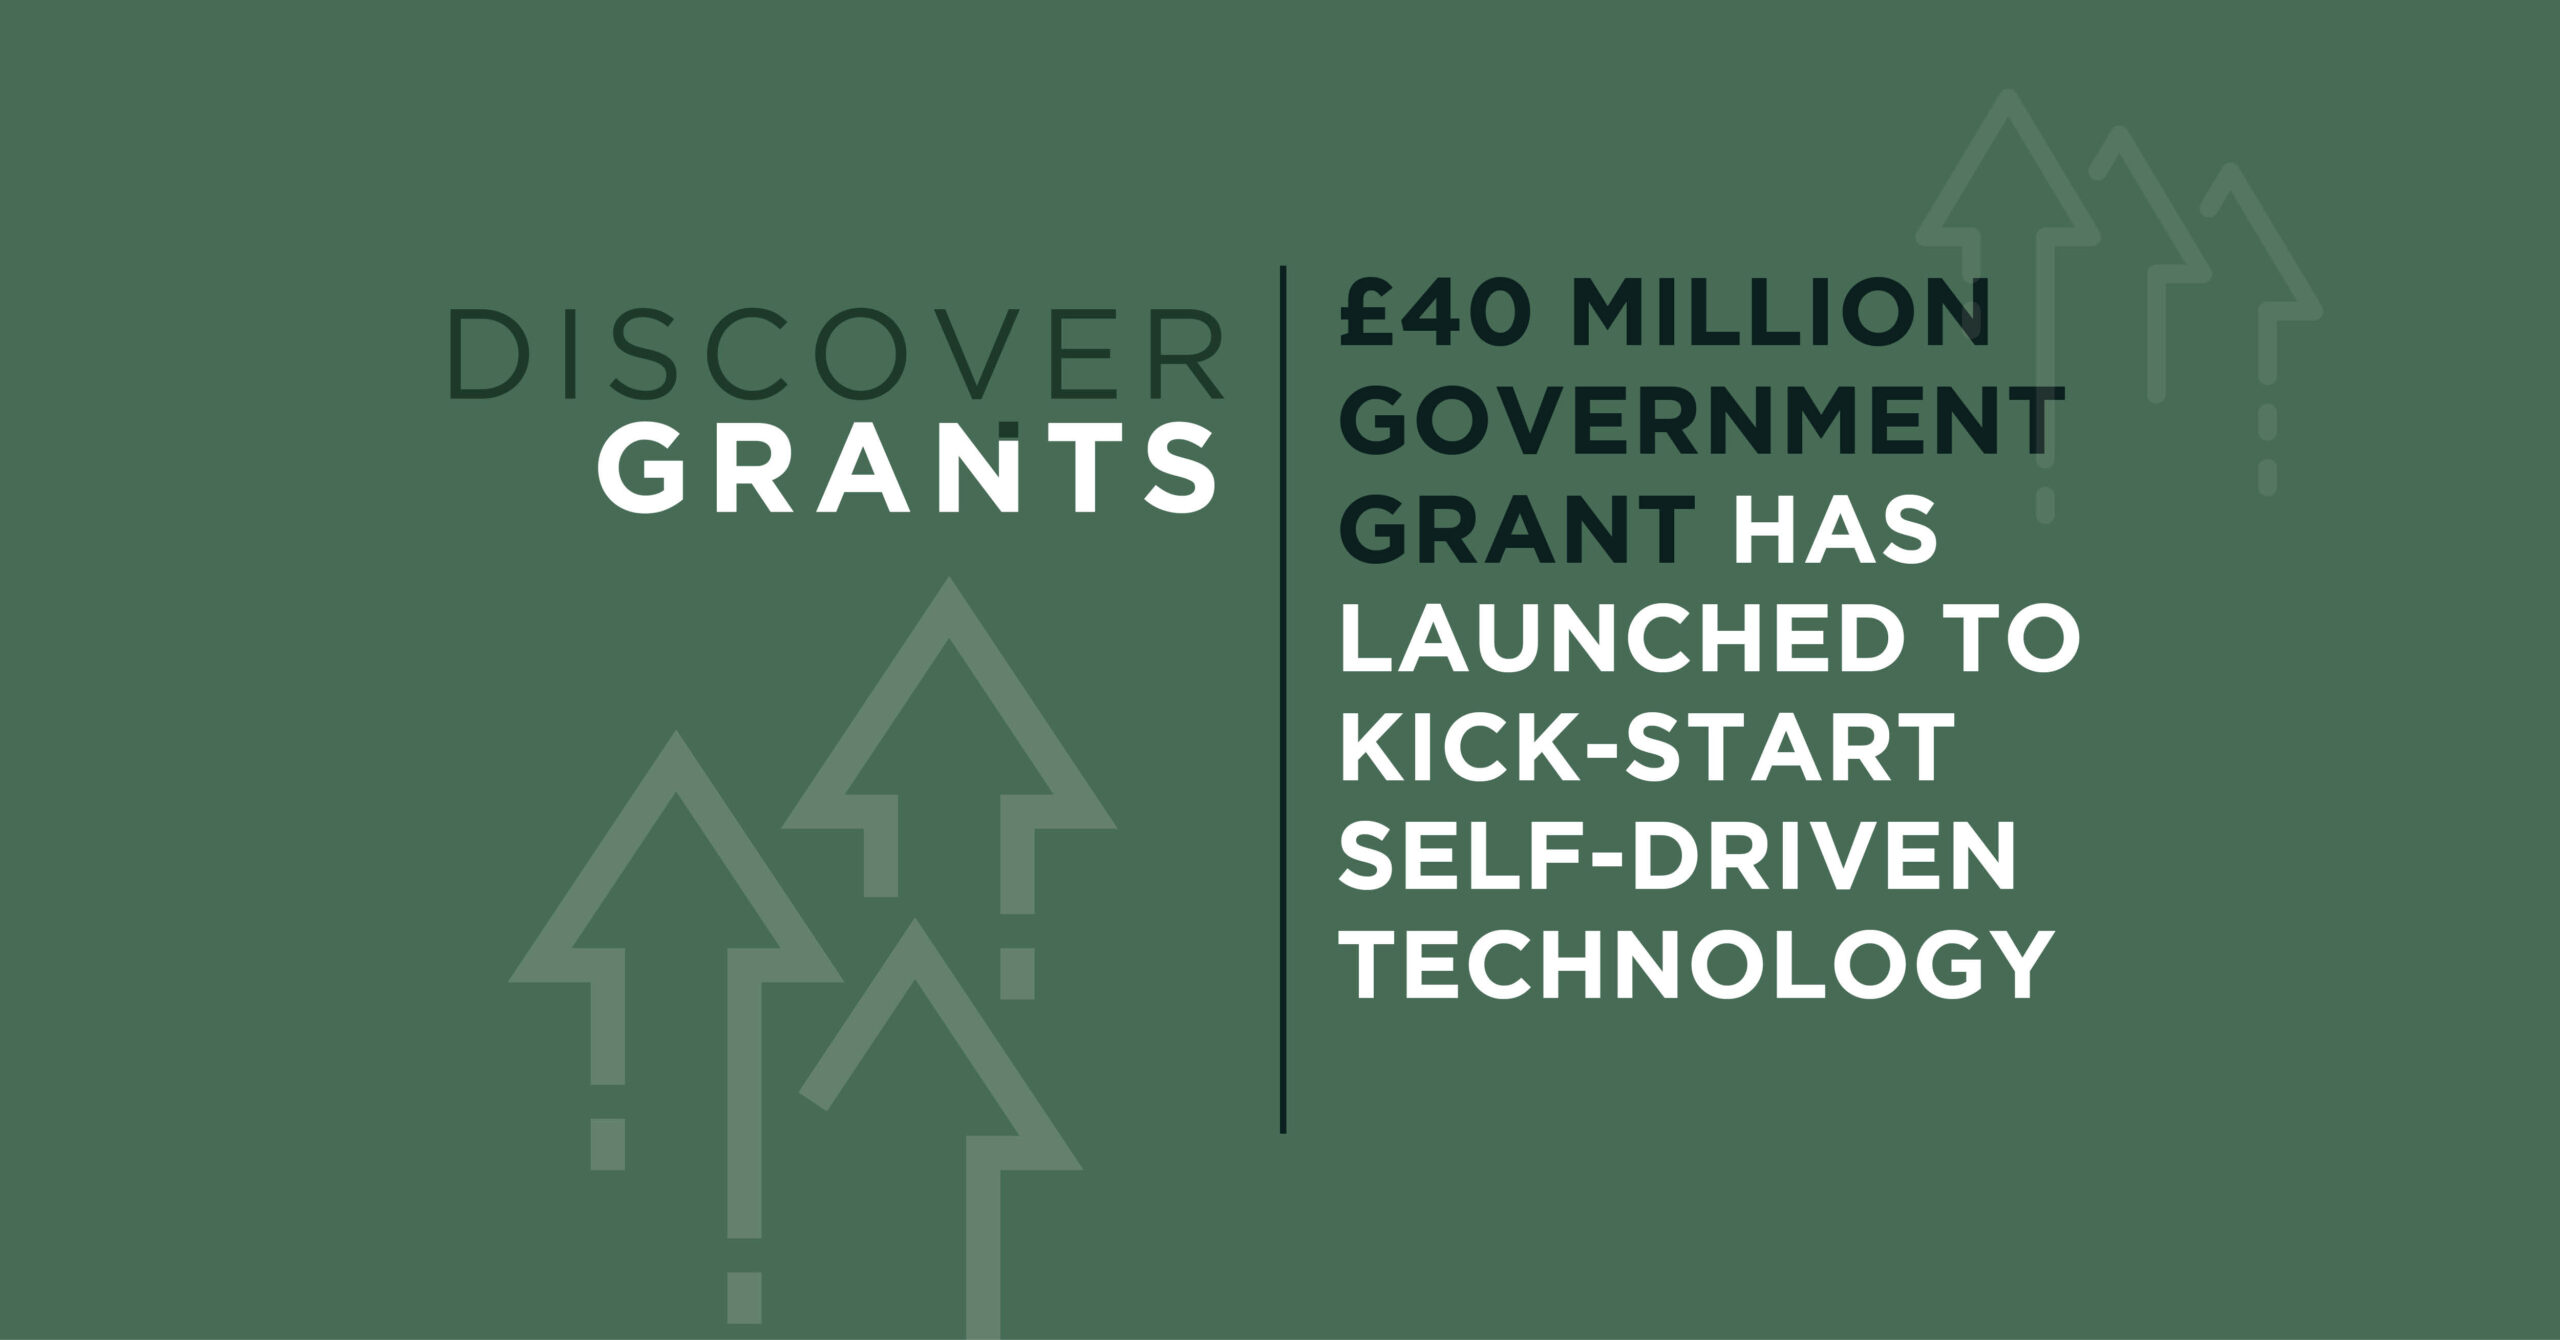 A New £40million Government Grant Has Launched to Kick-Start Self-Driven Technology